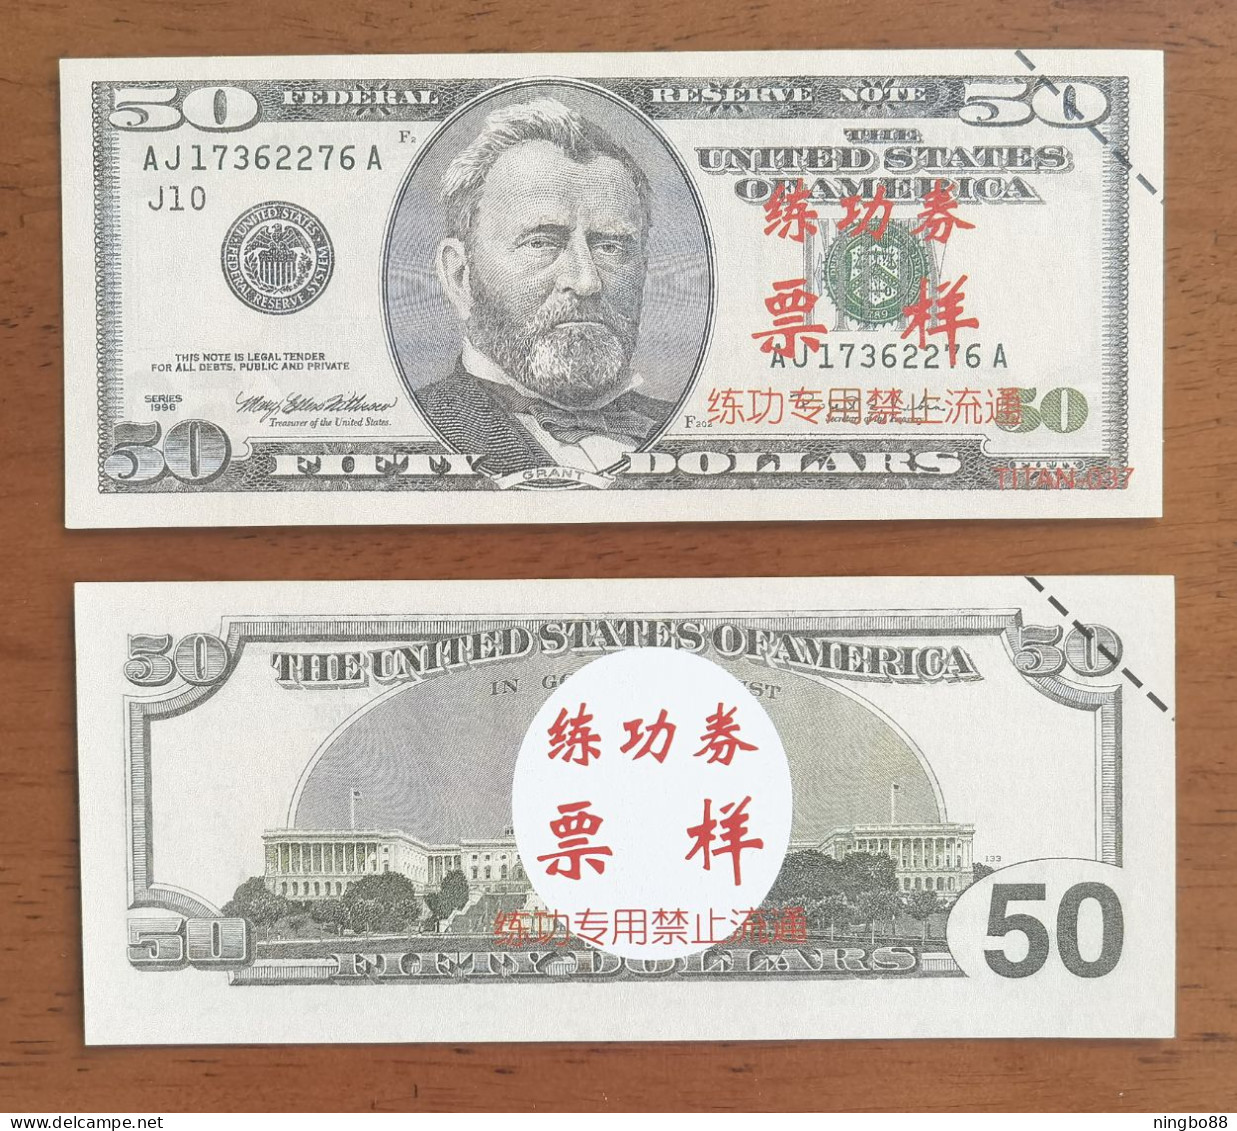 China BOC Bank (Bank Of China) Training/test Banknote,United States D Series $50 Dollars Note Specimen Overprint - Colecciones Lotes Mixtos